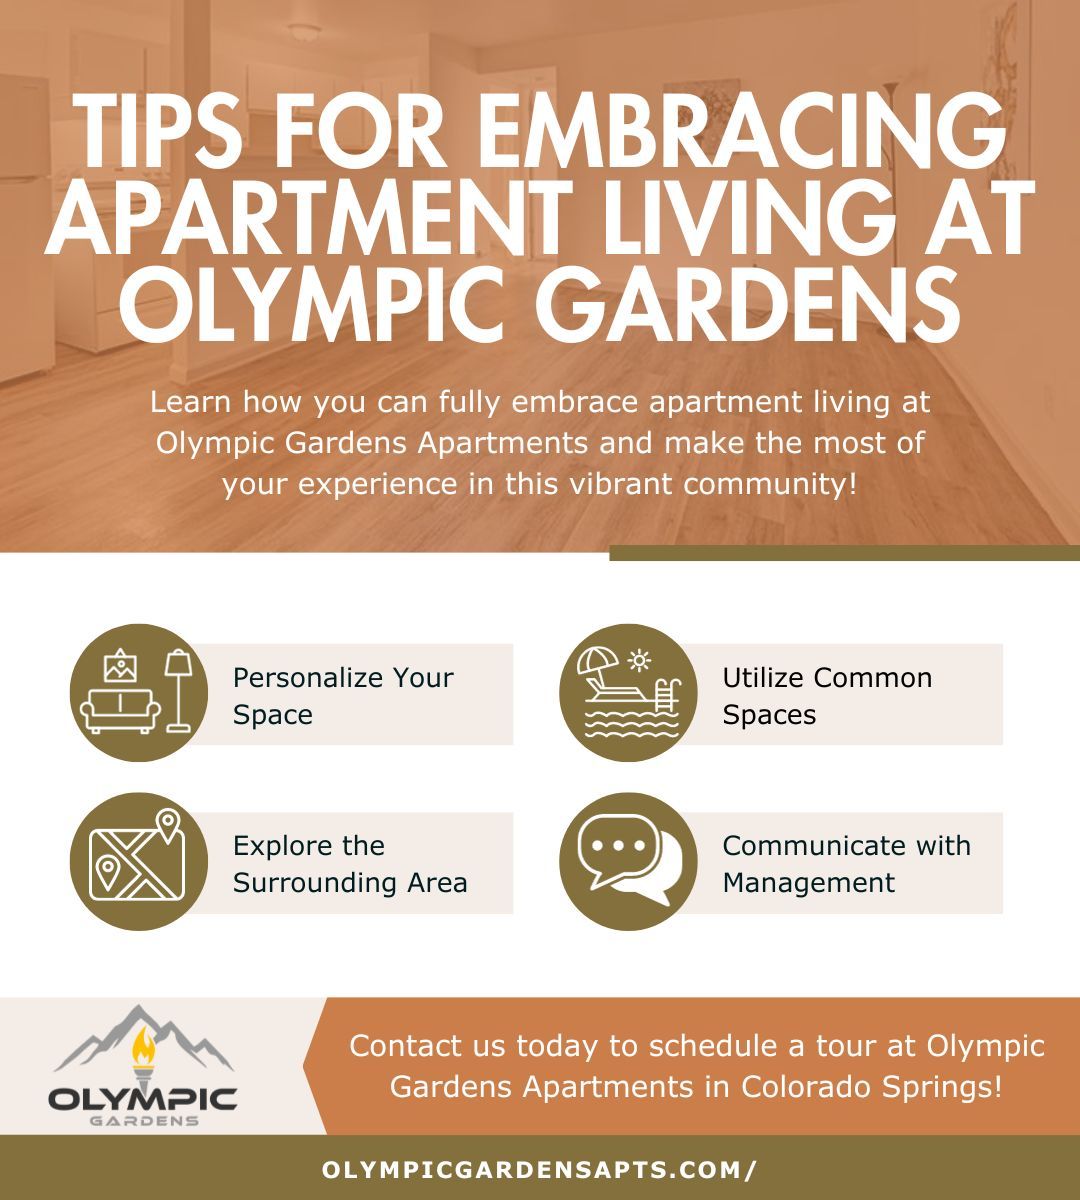 tips for embracing apartment living at Olympic Gardens